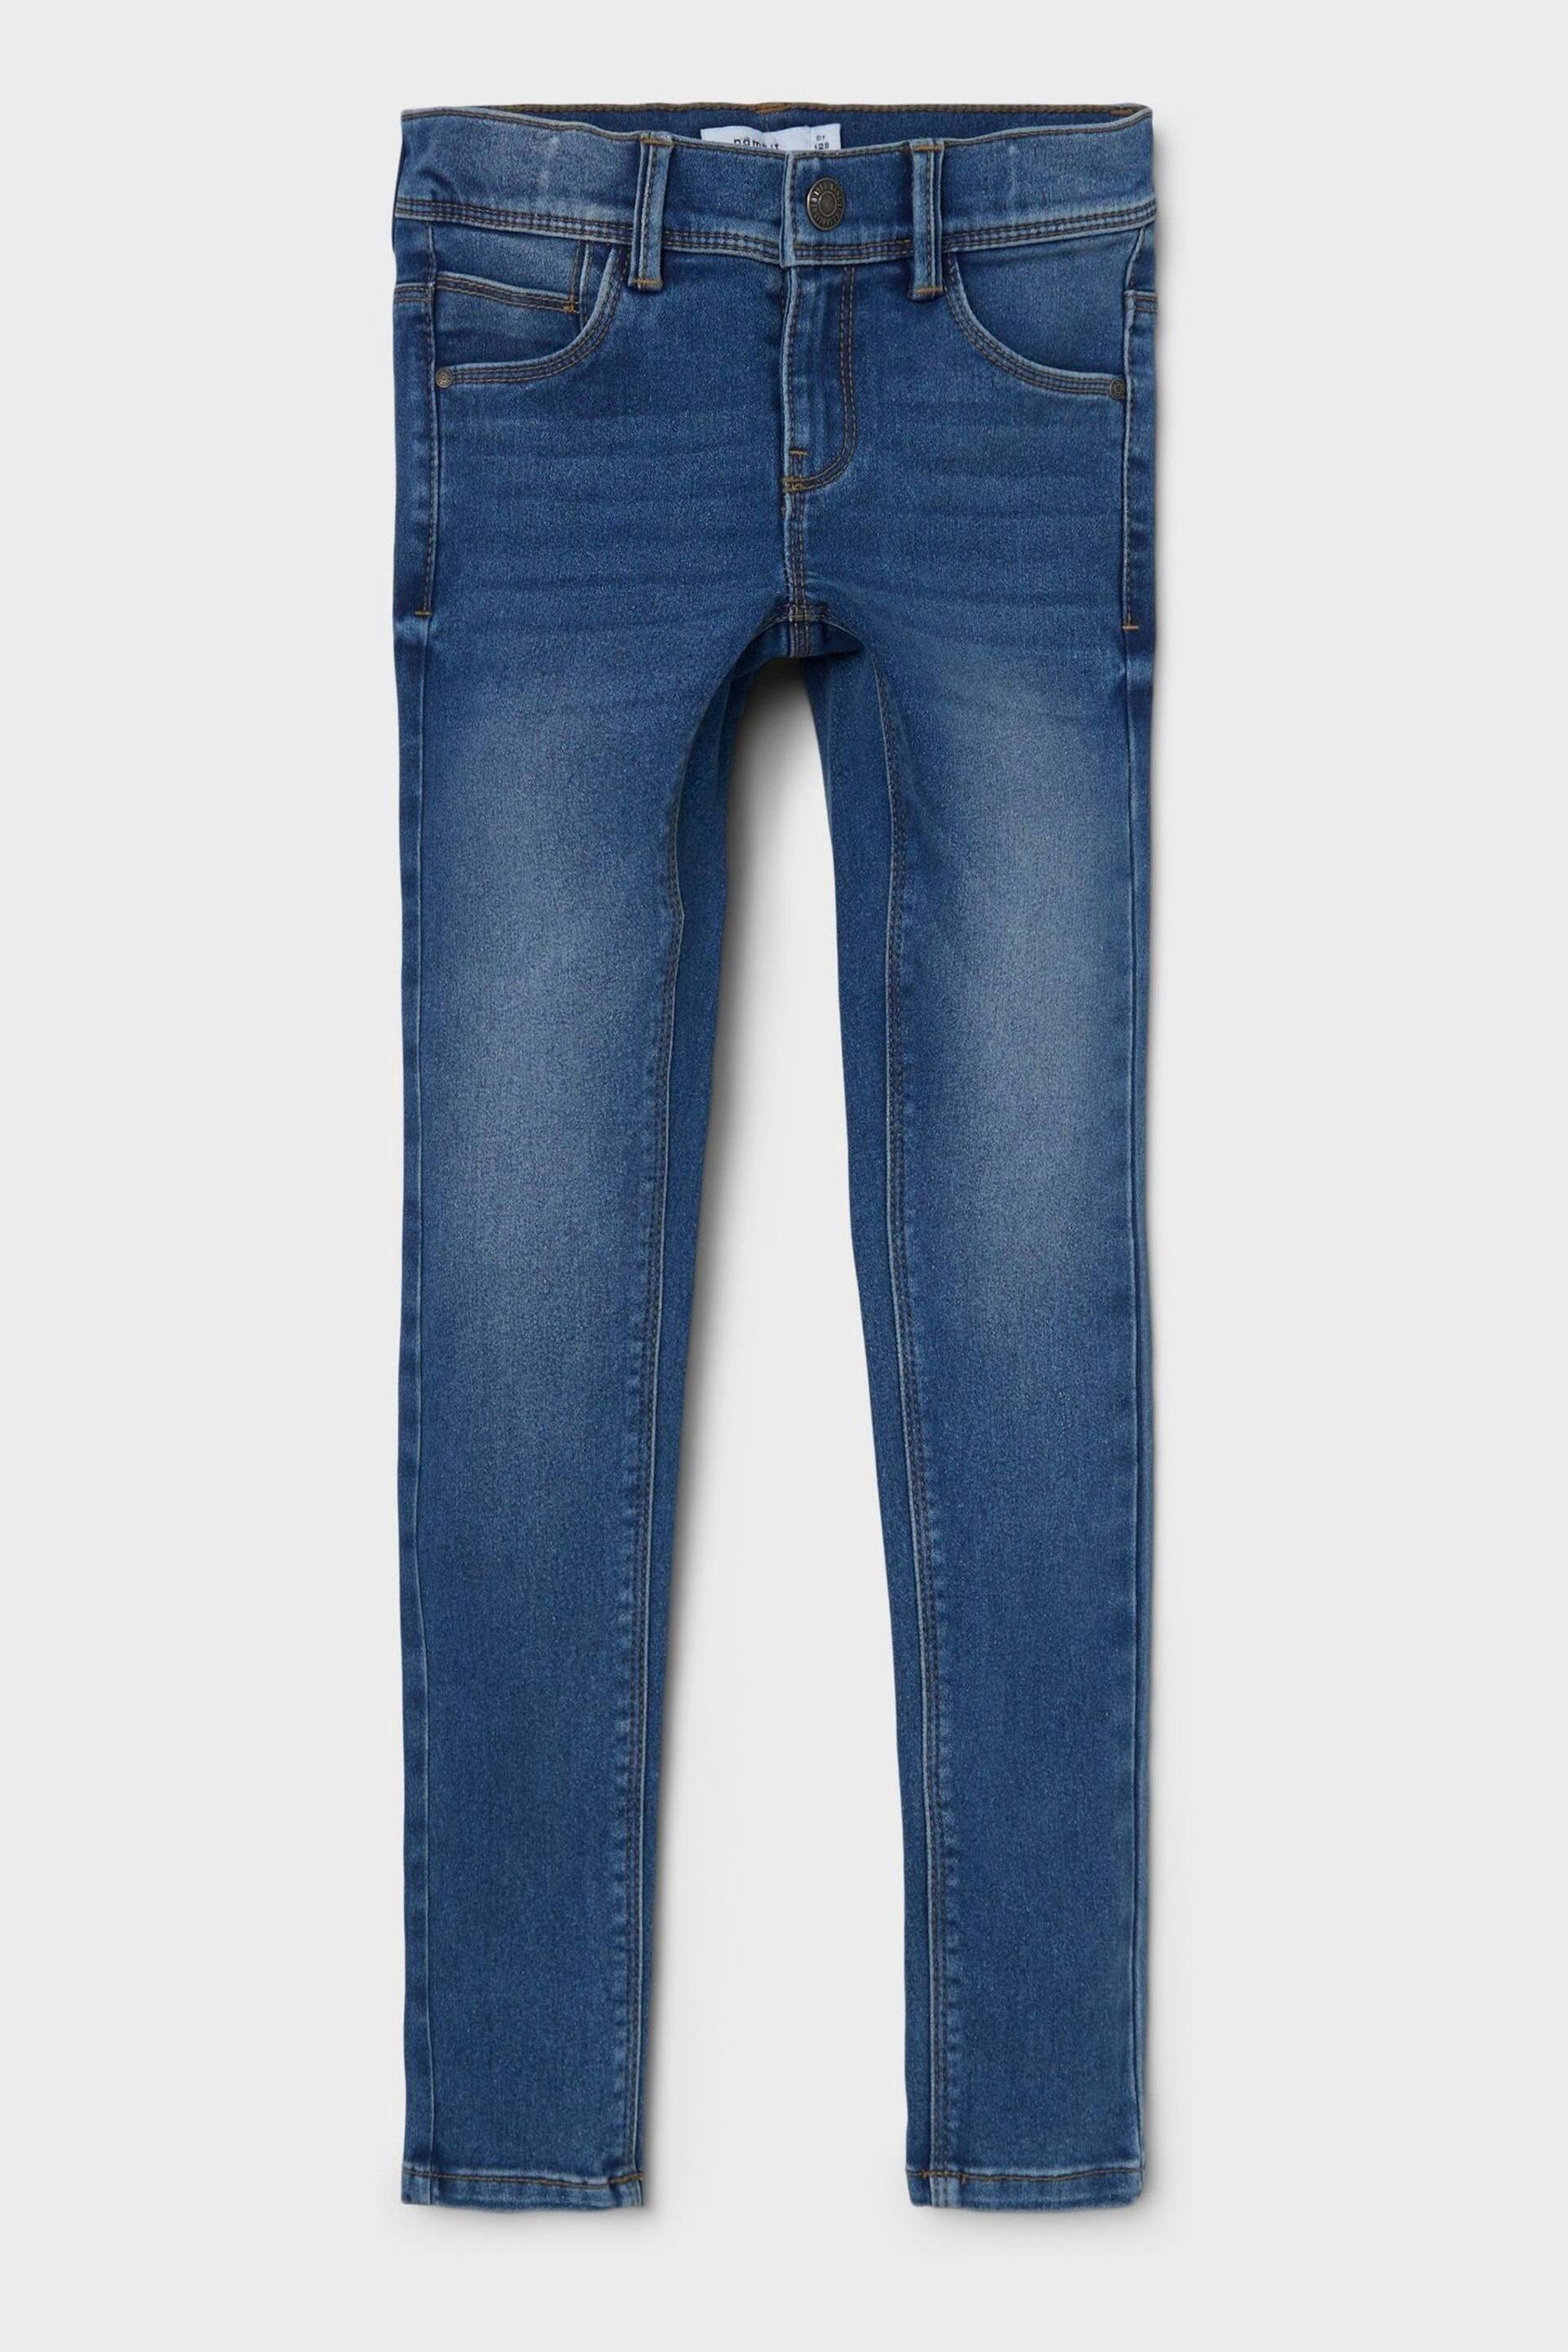 Name It Blue Skinny Jeans - Image 3 of 5